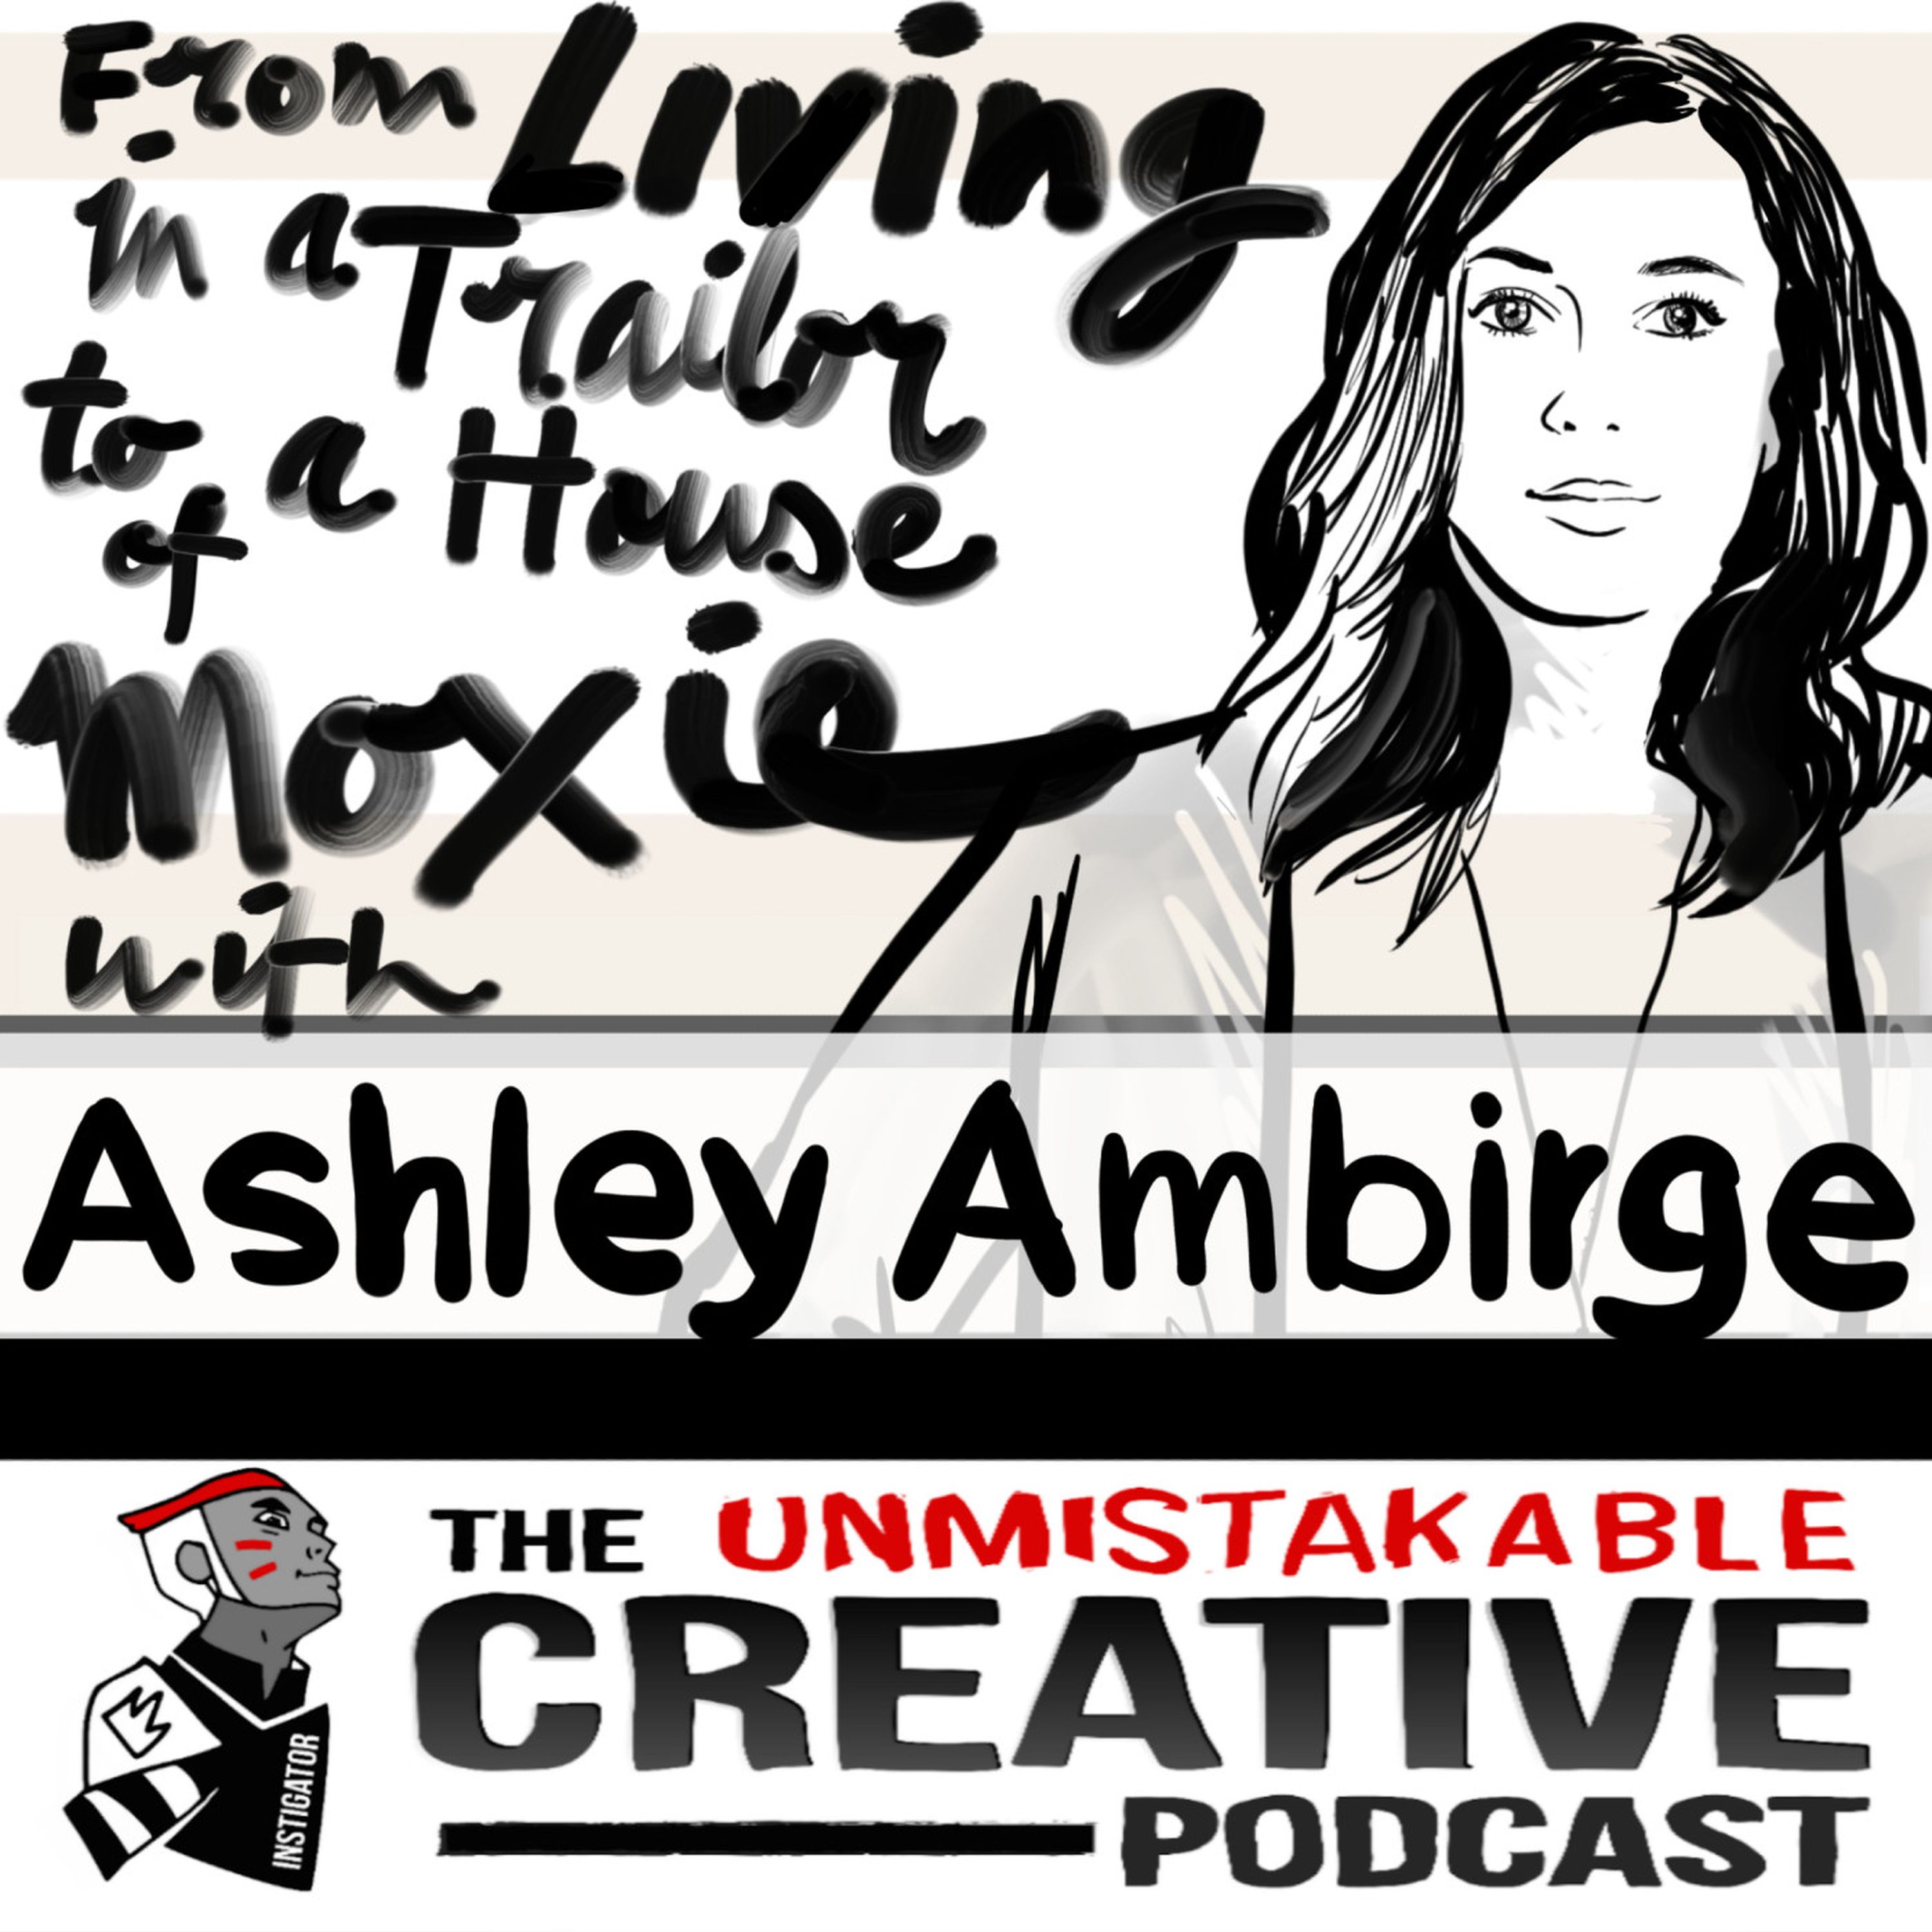 From Living in a Trailer to a House of Moxie With Ashley Ambirge Image